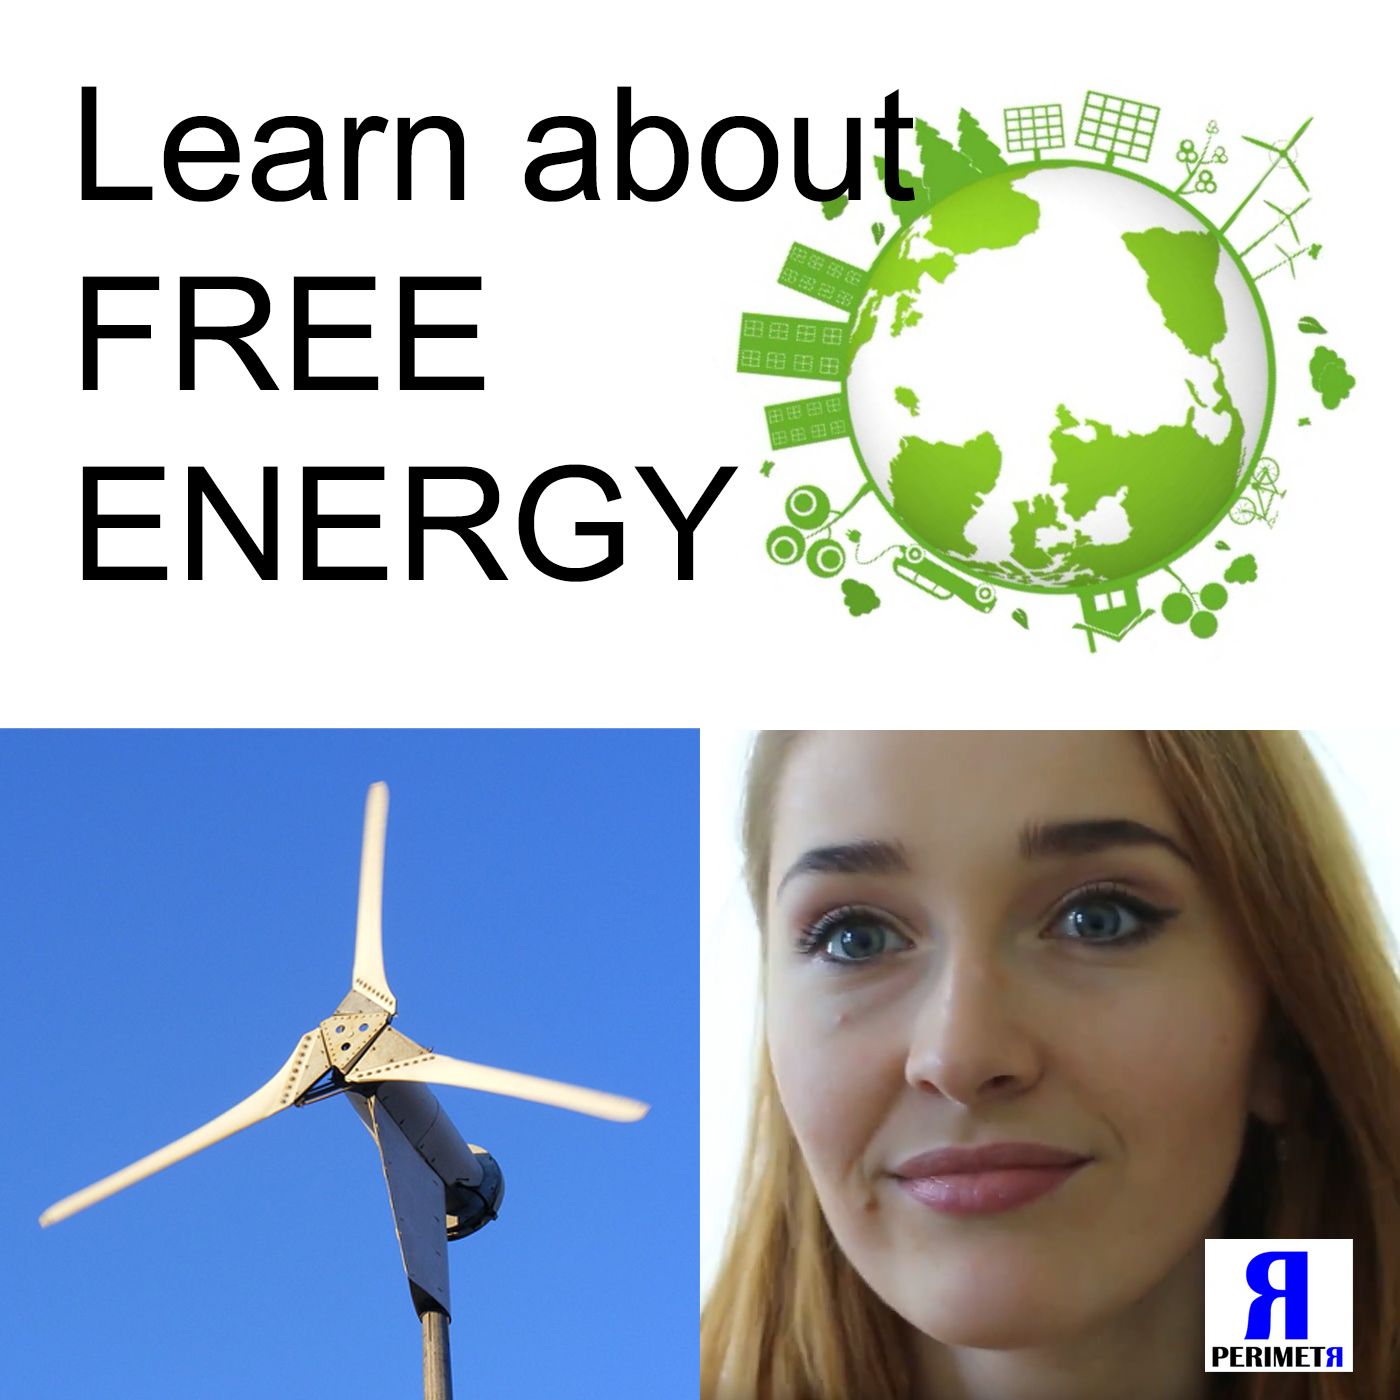 Learn about FREE Energy